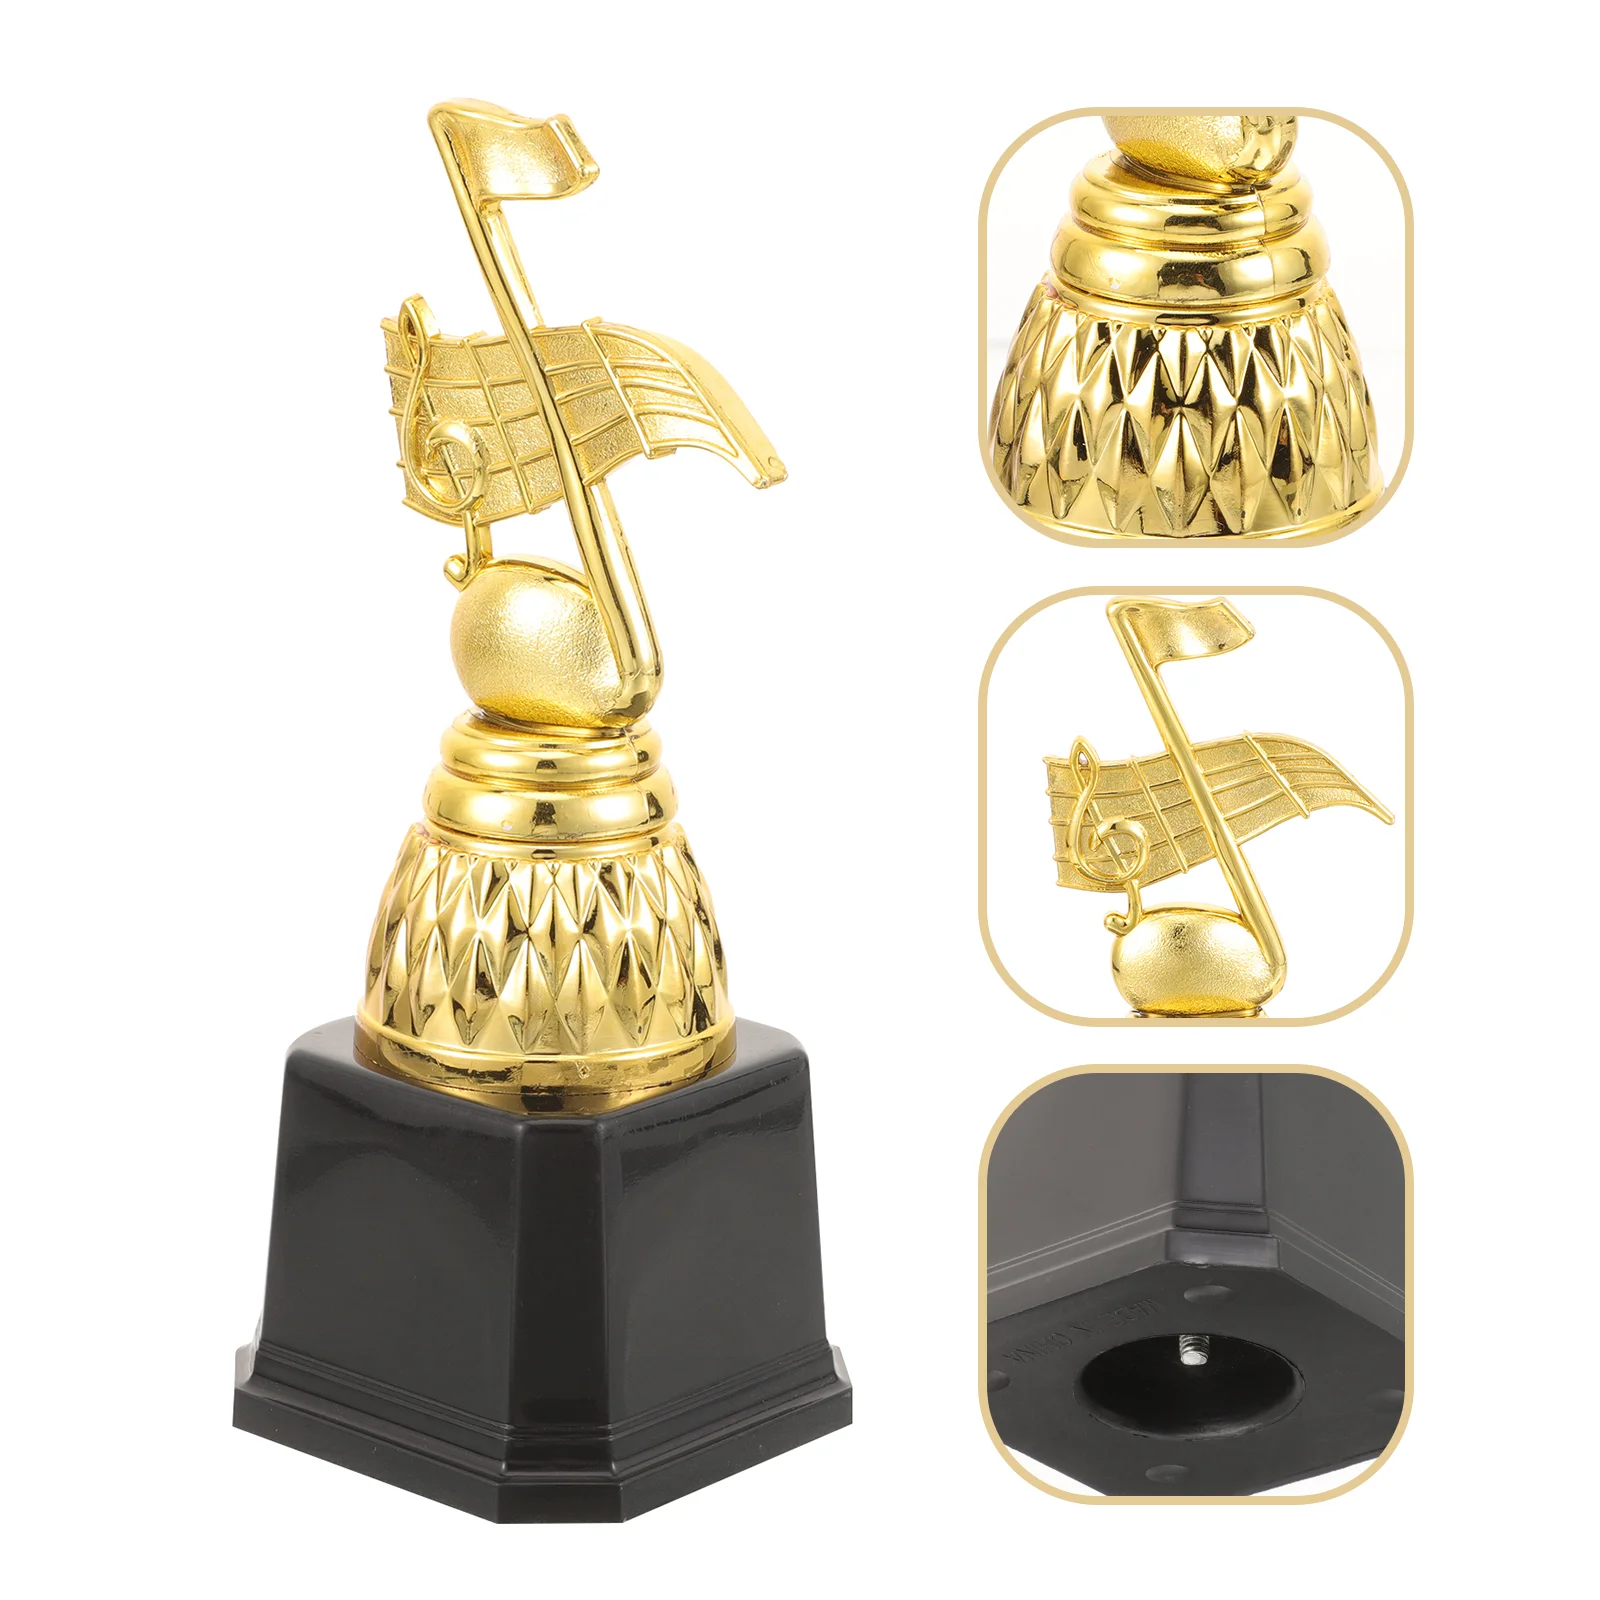 

Singing Competition Trophy Award School Plastic Trophies Delicate Music Kids Tiny Decorate Small